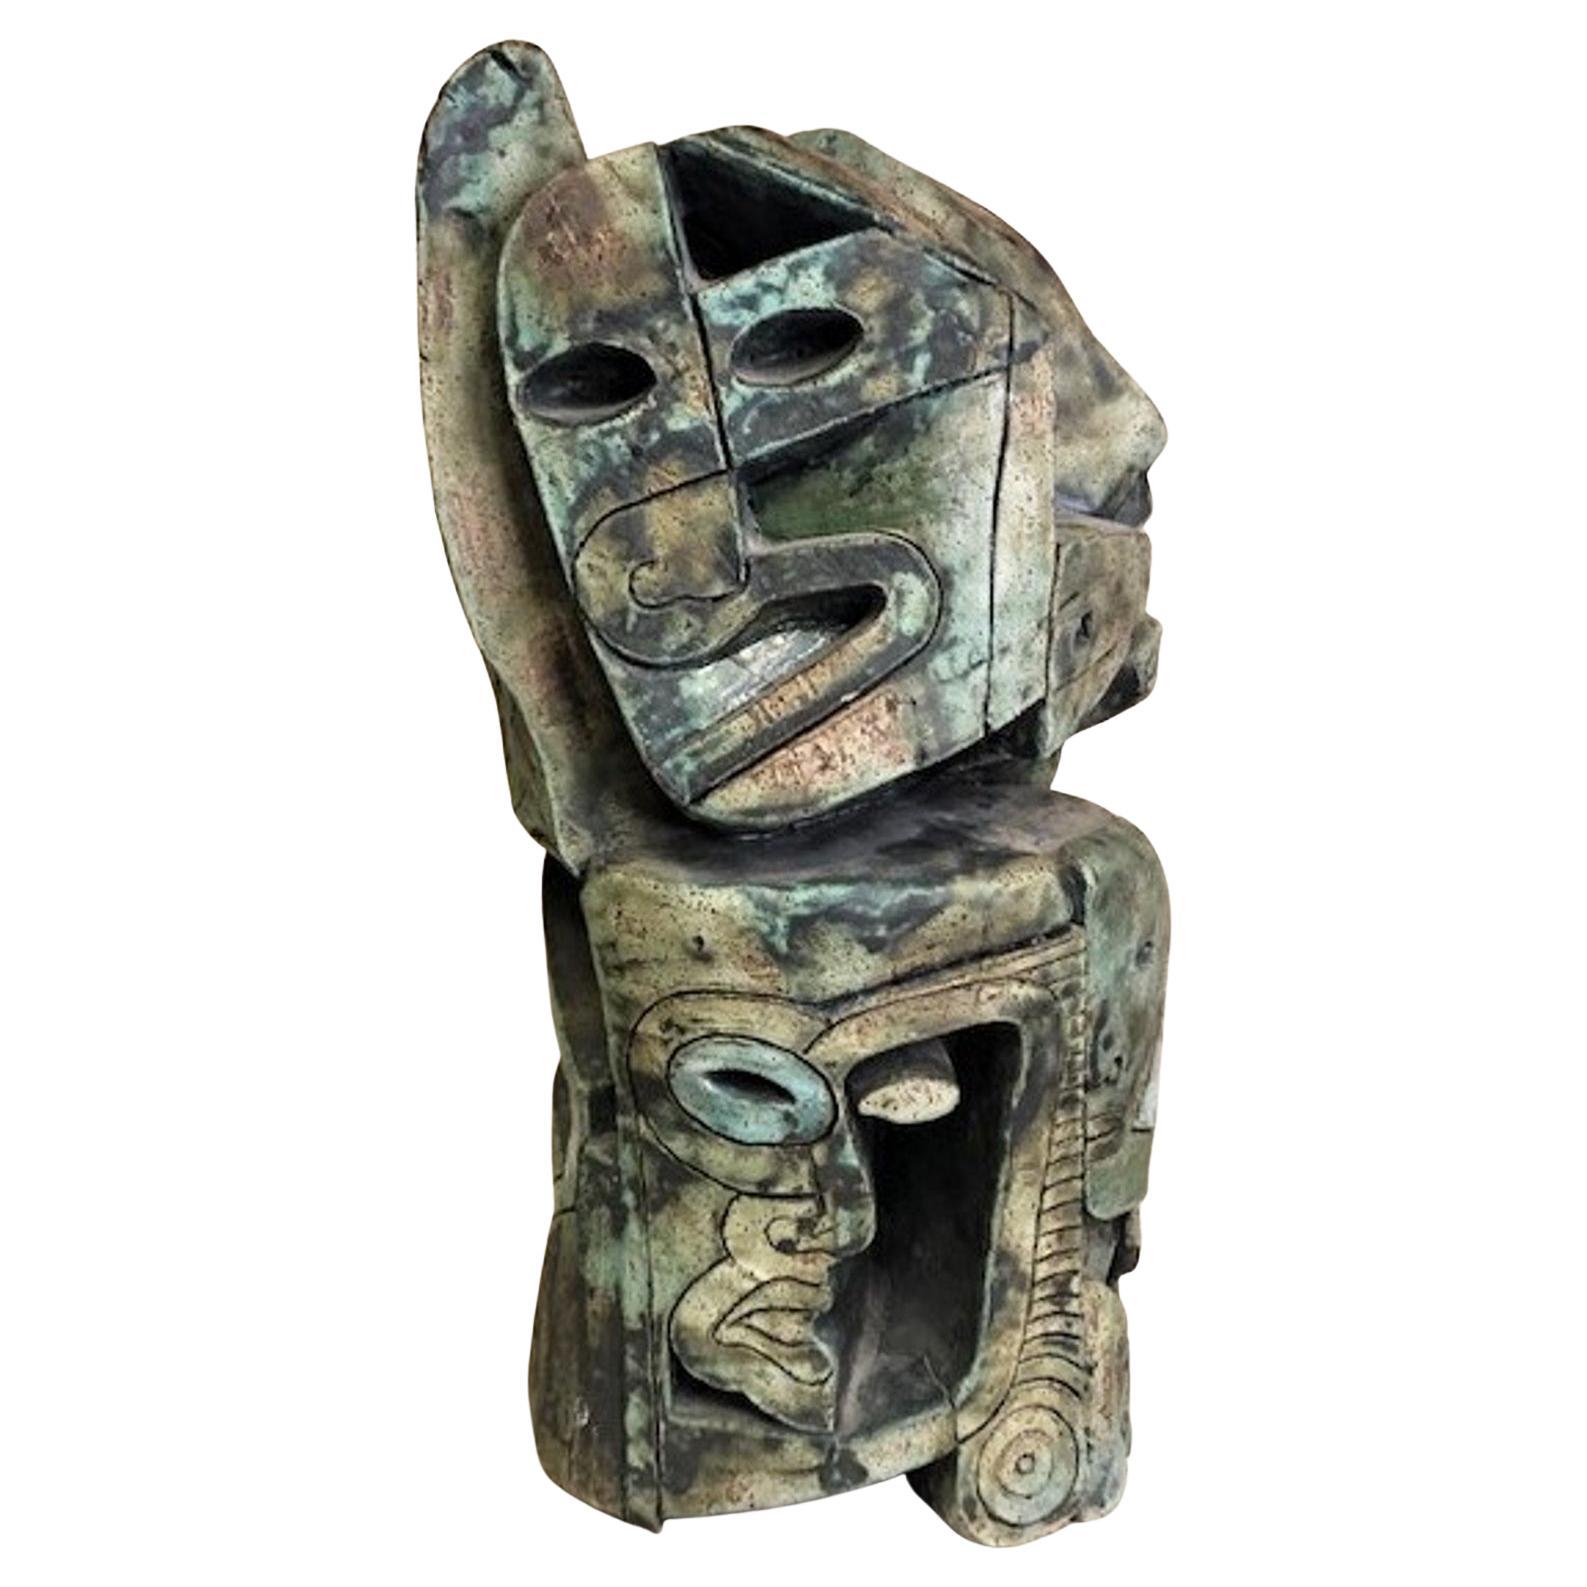 Doug Rochelle, 3 Faces, American Abstract Expressionist Ceramic Sculpture, XX C 